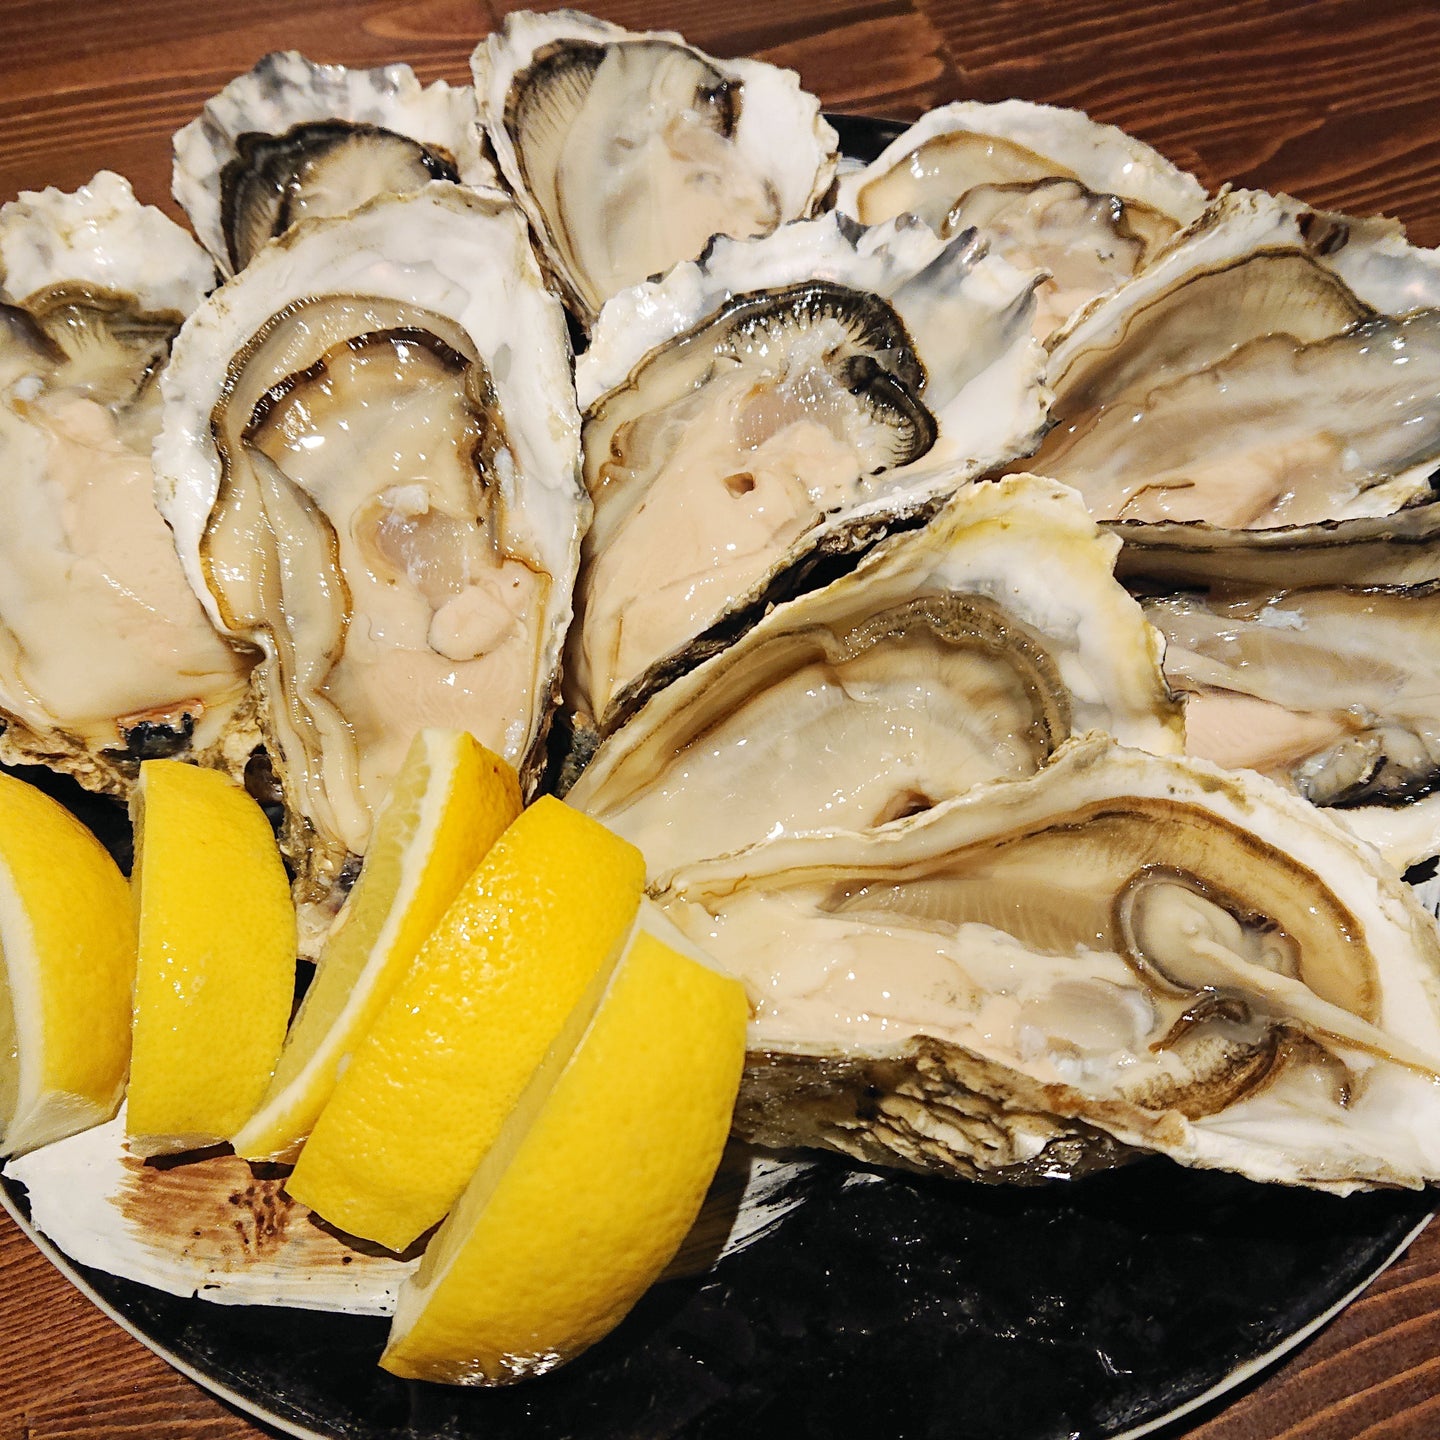 Oyster with shell 2 pcs/pack